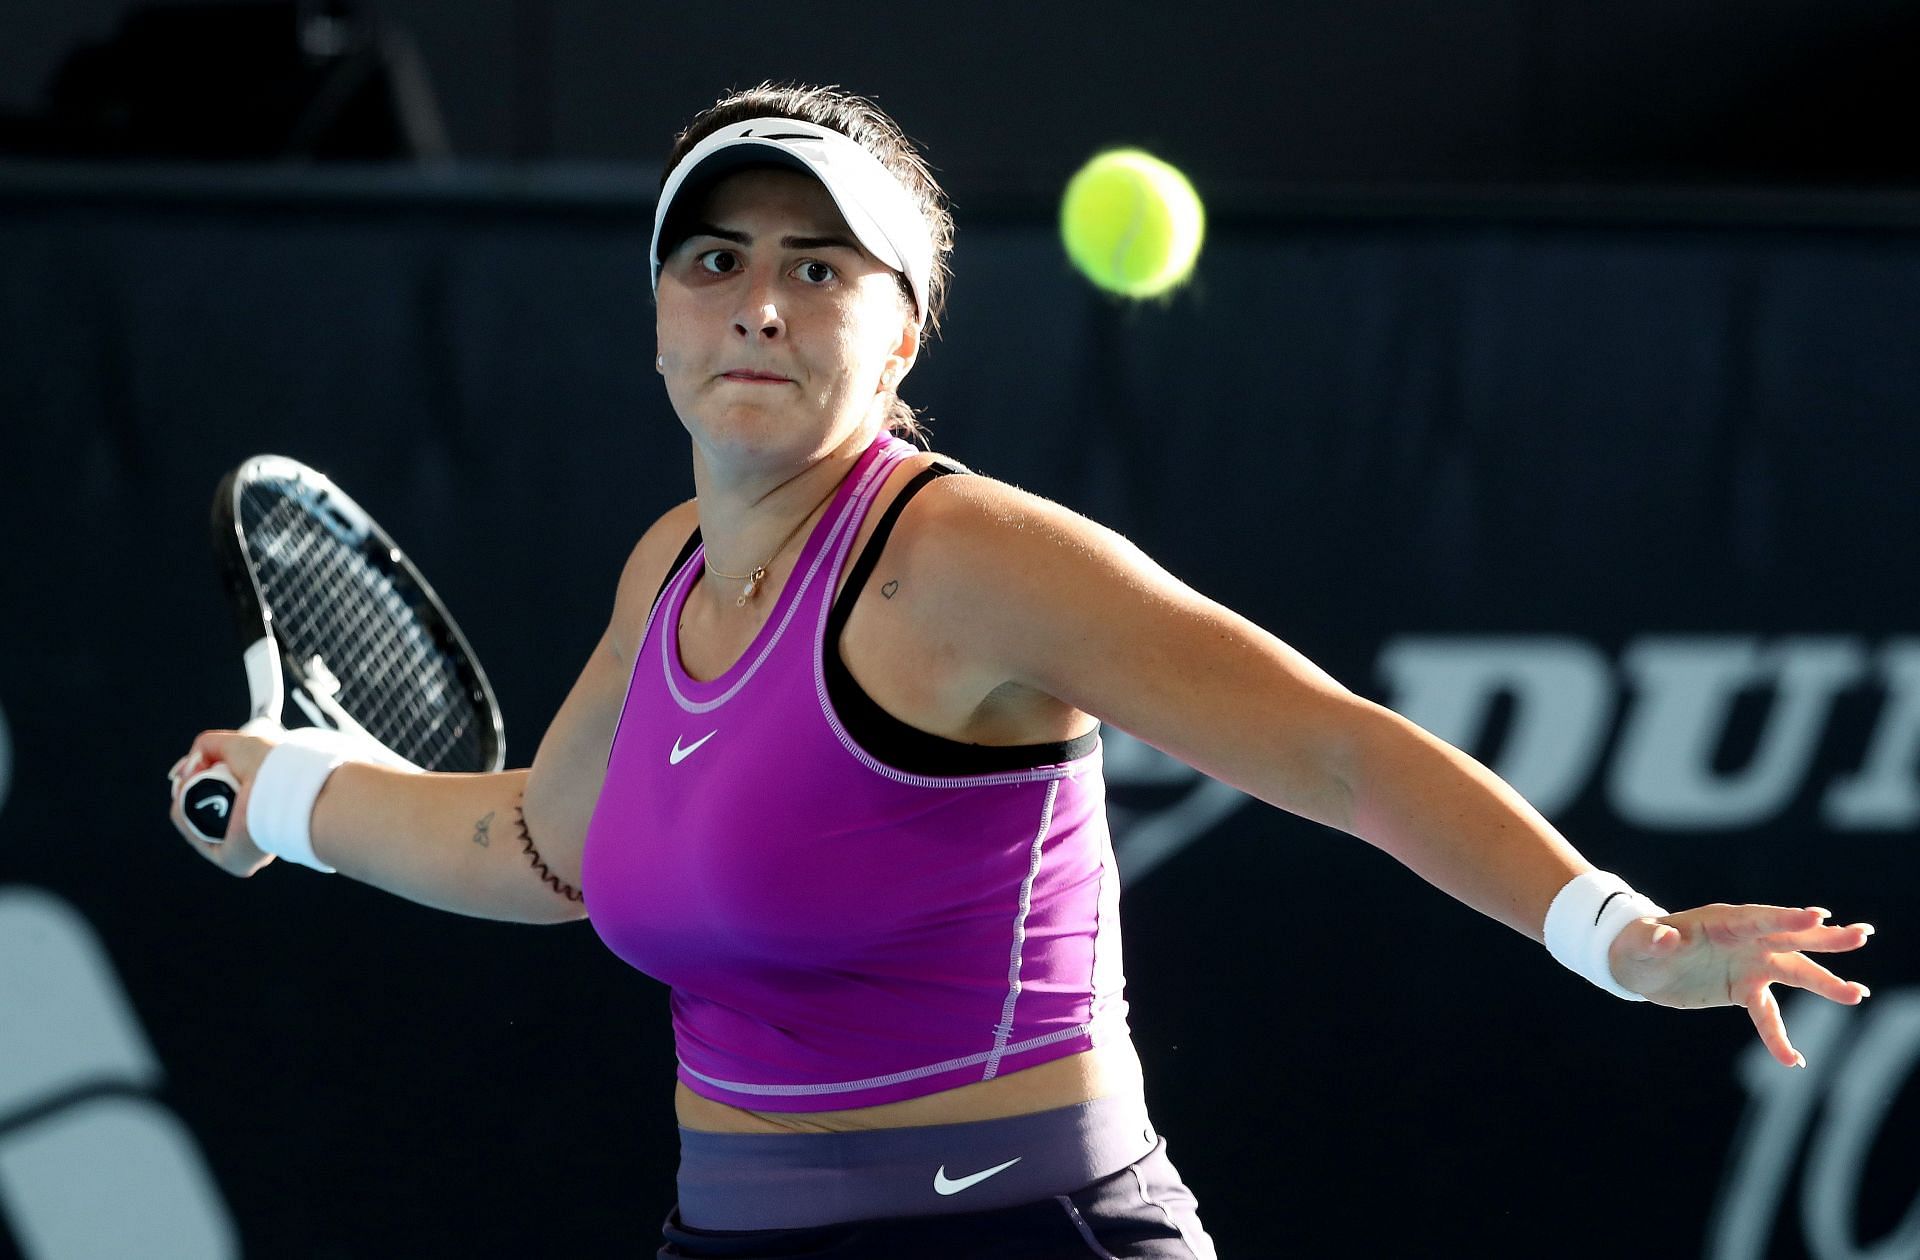 Bianca Andreescu wants to win &quot;every match&quot; at the end of the day